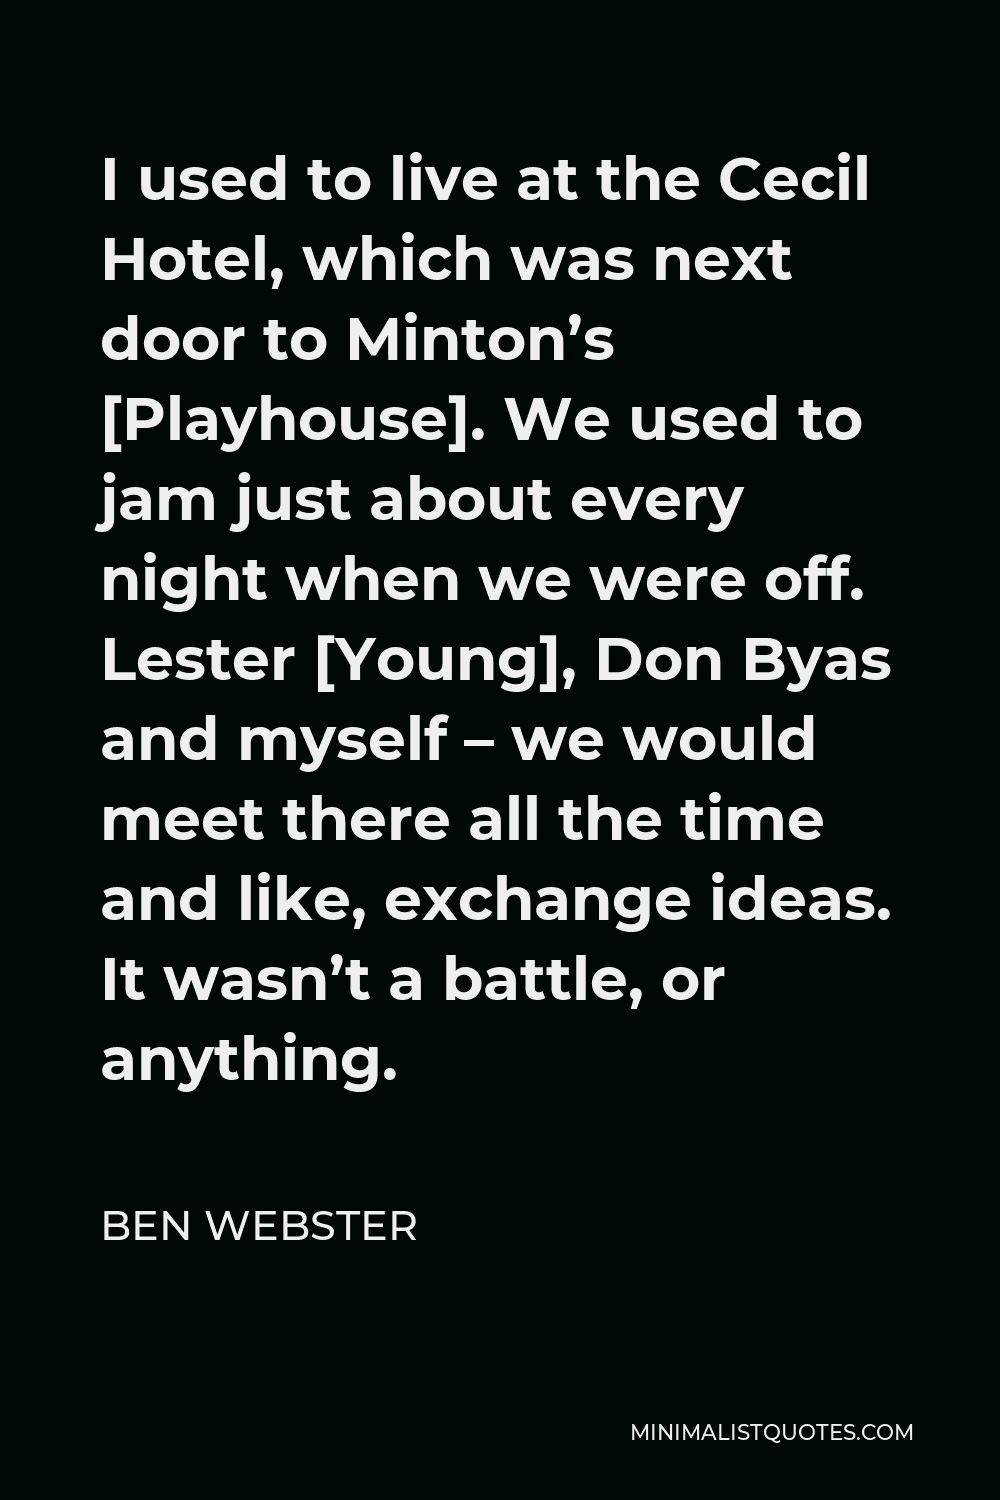 Ben Webster Quote - I used to live at the Cecil Hotel, which was next door to Minton’s [Playhouse]. We used to jam just about every night when we were off. Lester [Young], Don Byas and myself – we would meet there all the time and like, exchange ideas. It wasn’t a battle, or anything.